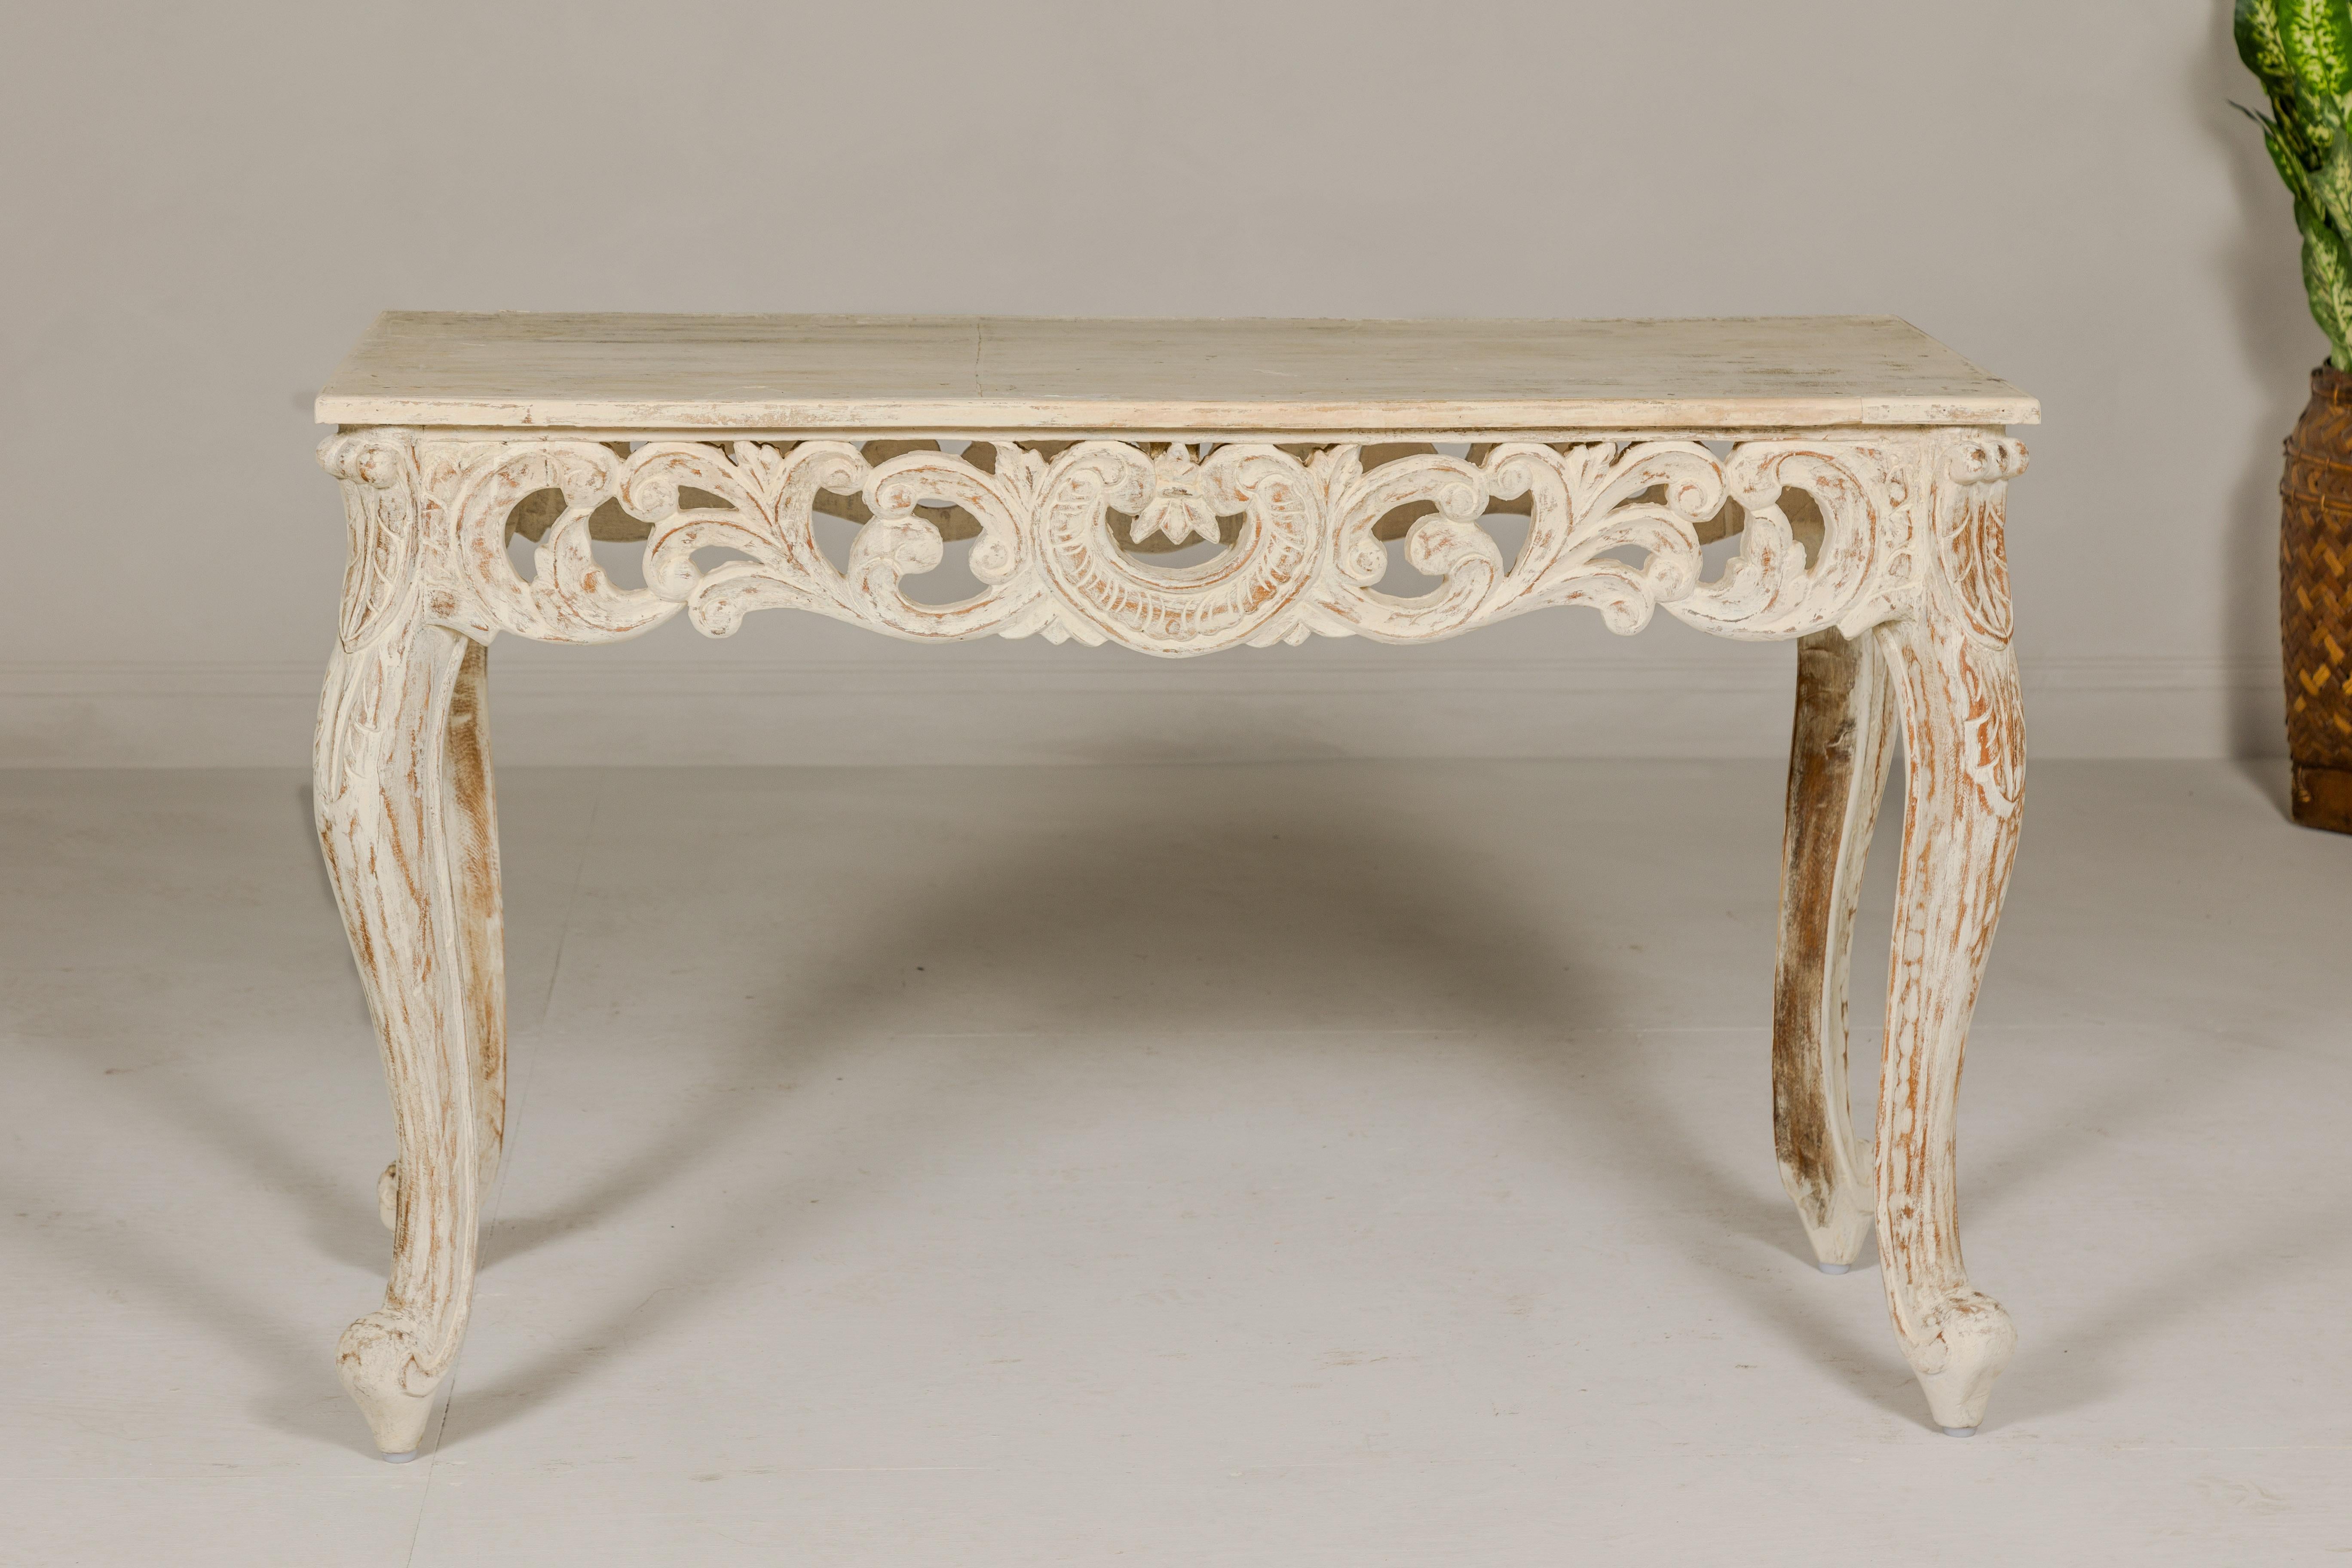 Contemporary Rococo Style Painted Console Table with Carved Apron and Distressed Finish For Sale